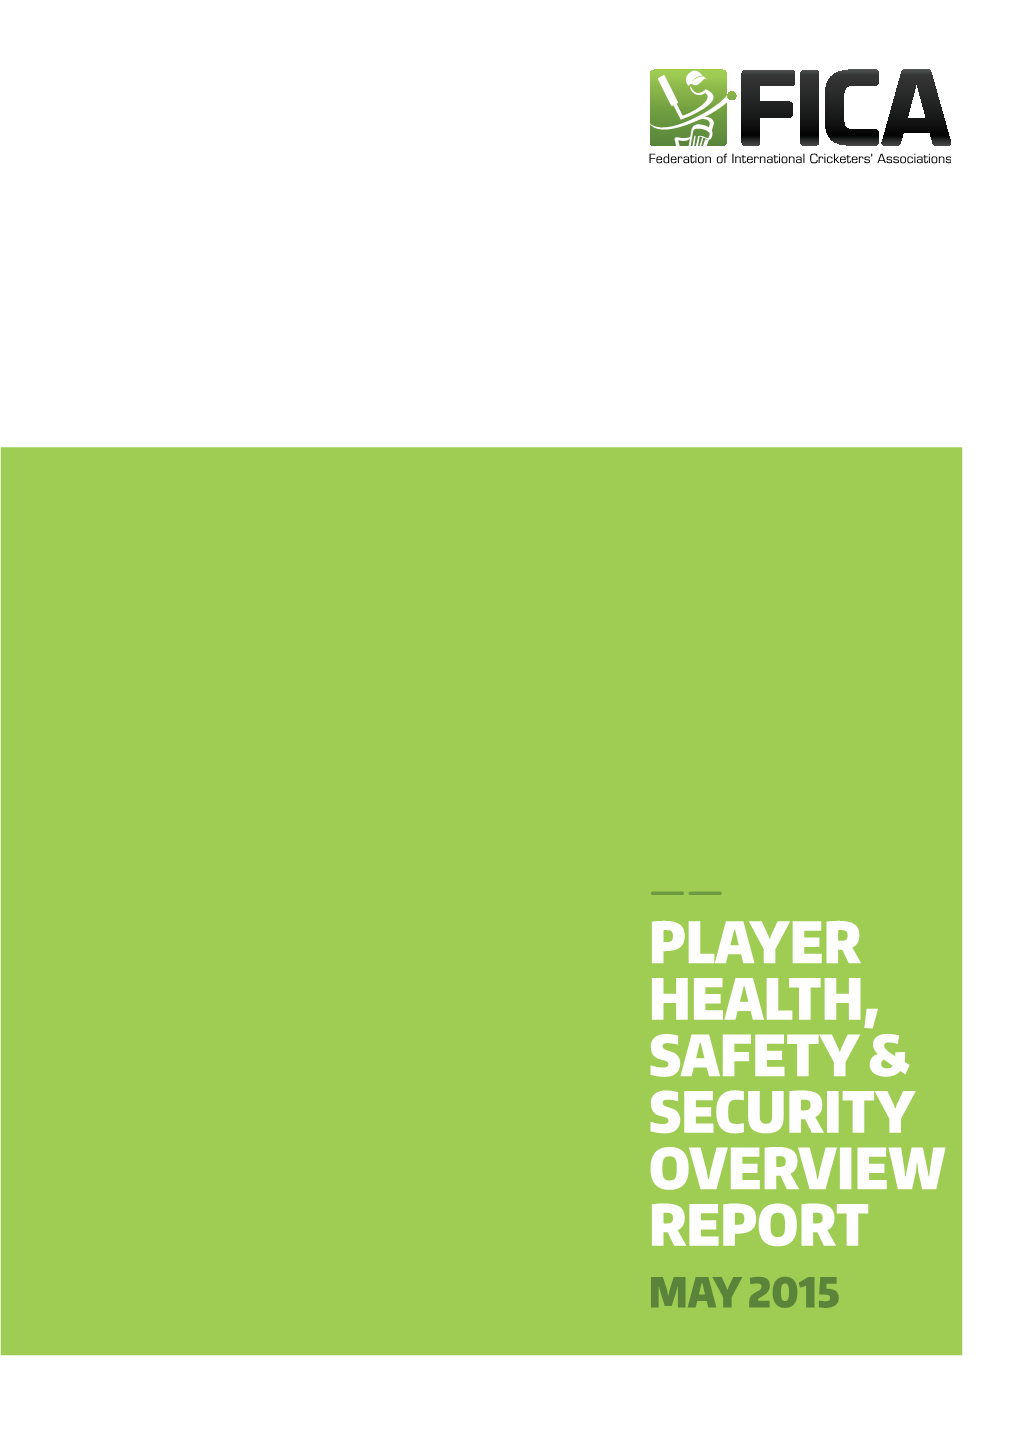 Player Health, Safety & Security Overview Report